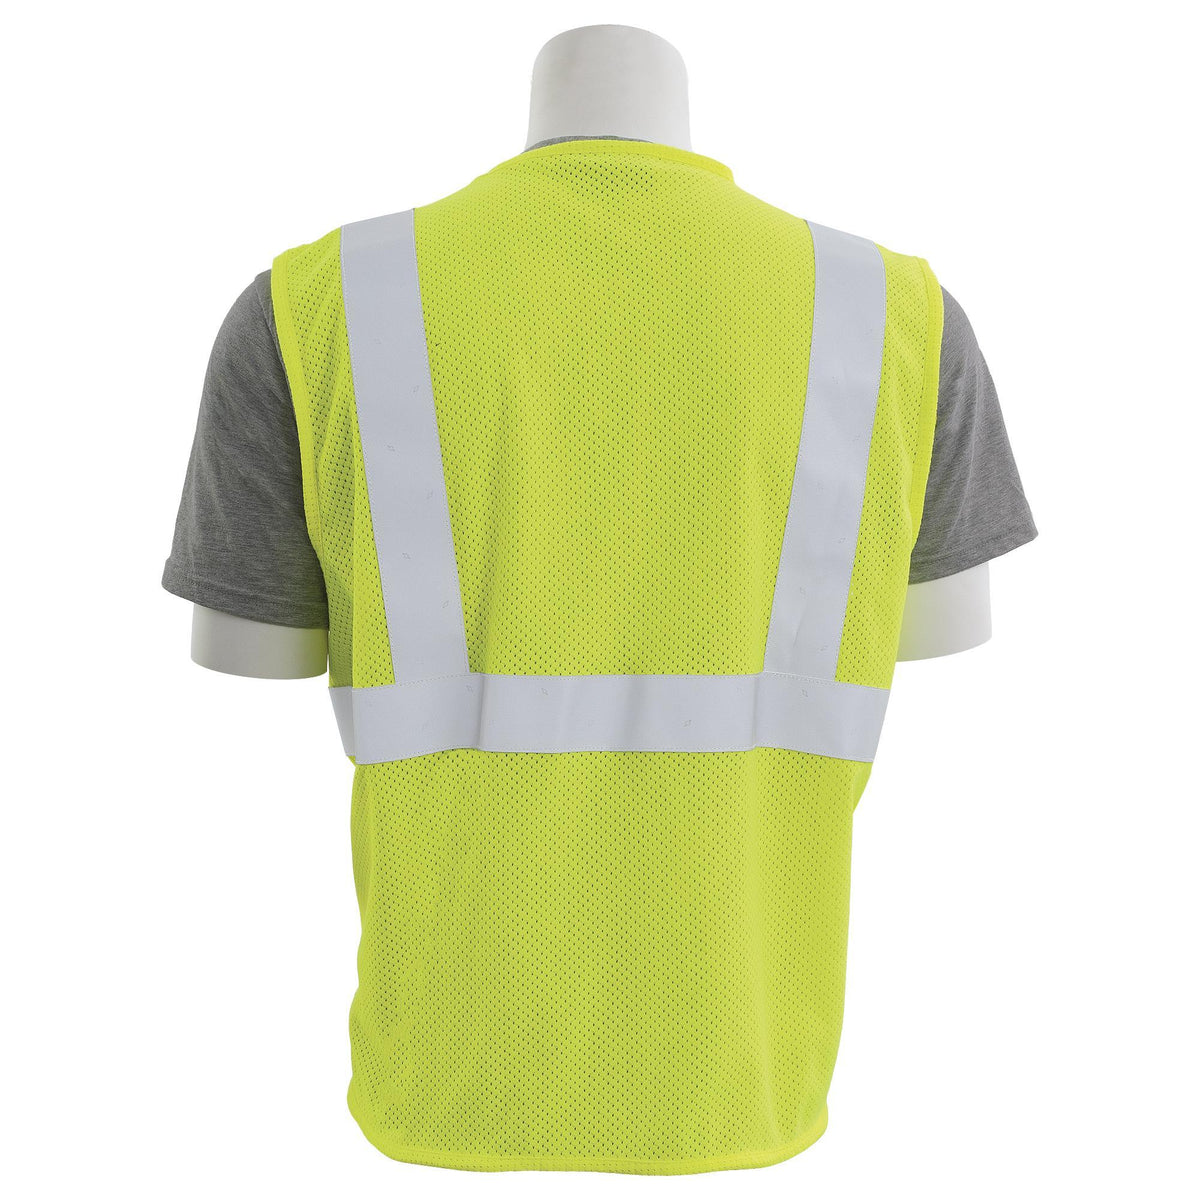 IFR152Z Class 2 Inherently Flame Resistant Zippered Mesh Safety Vest 1pc